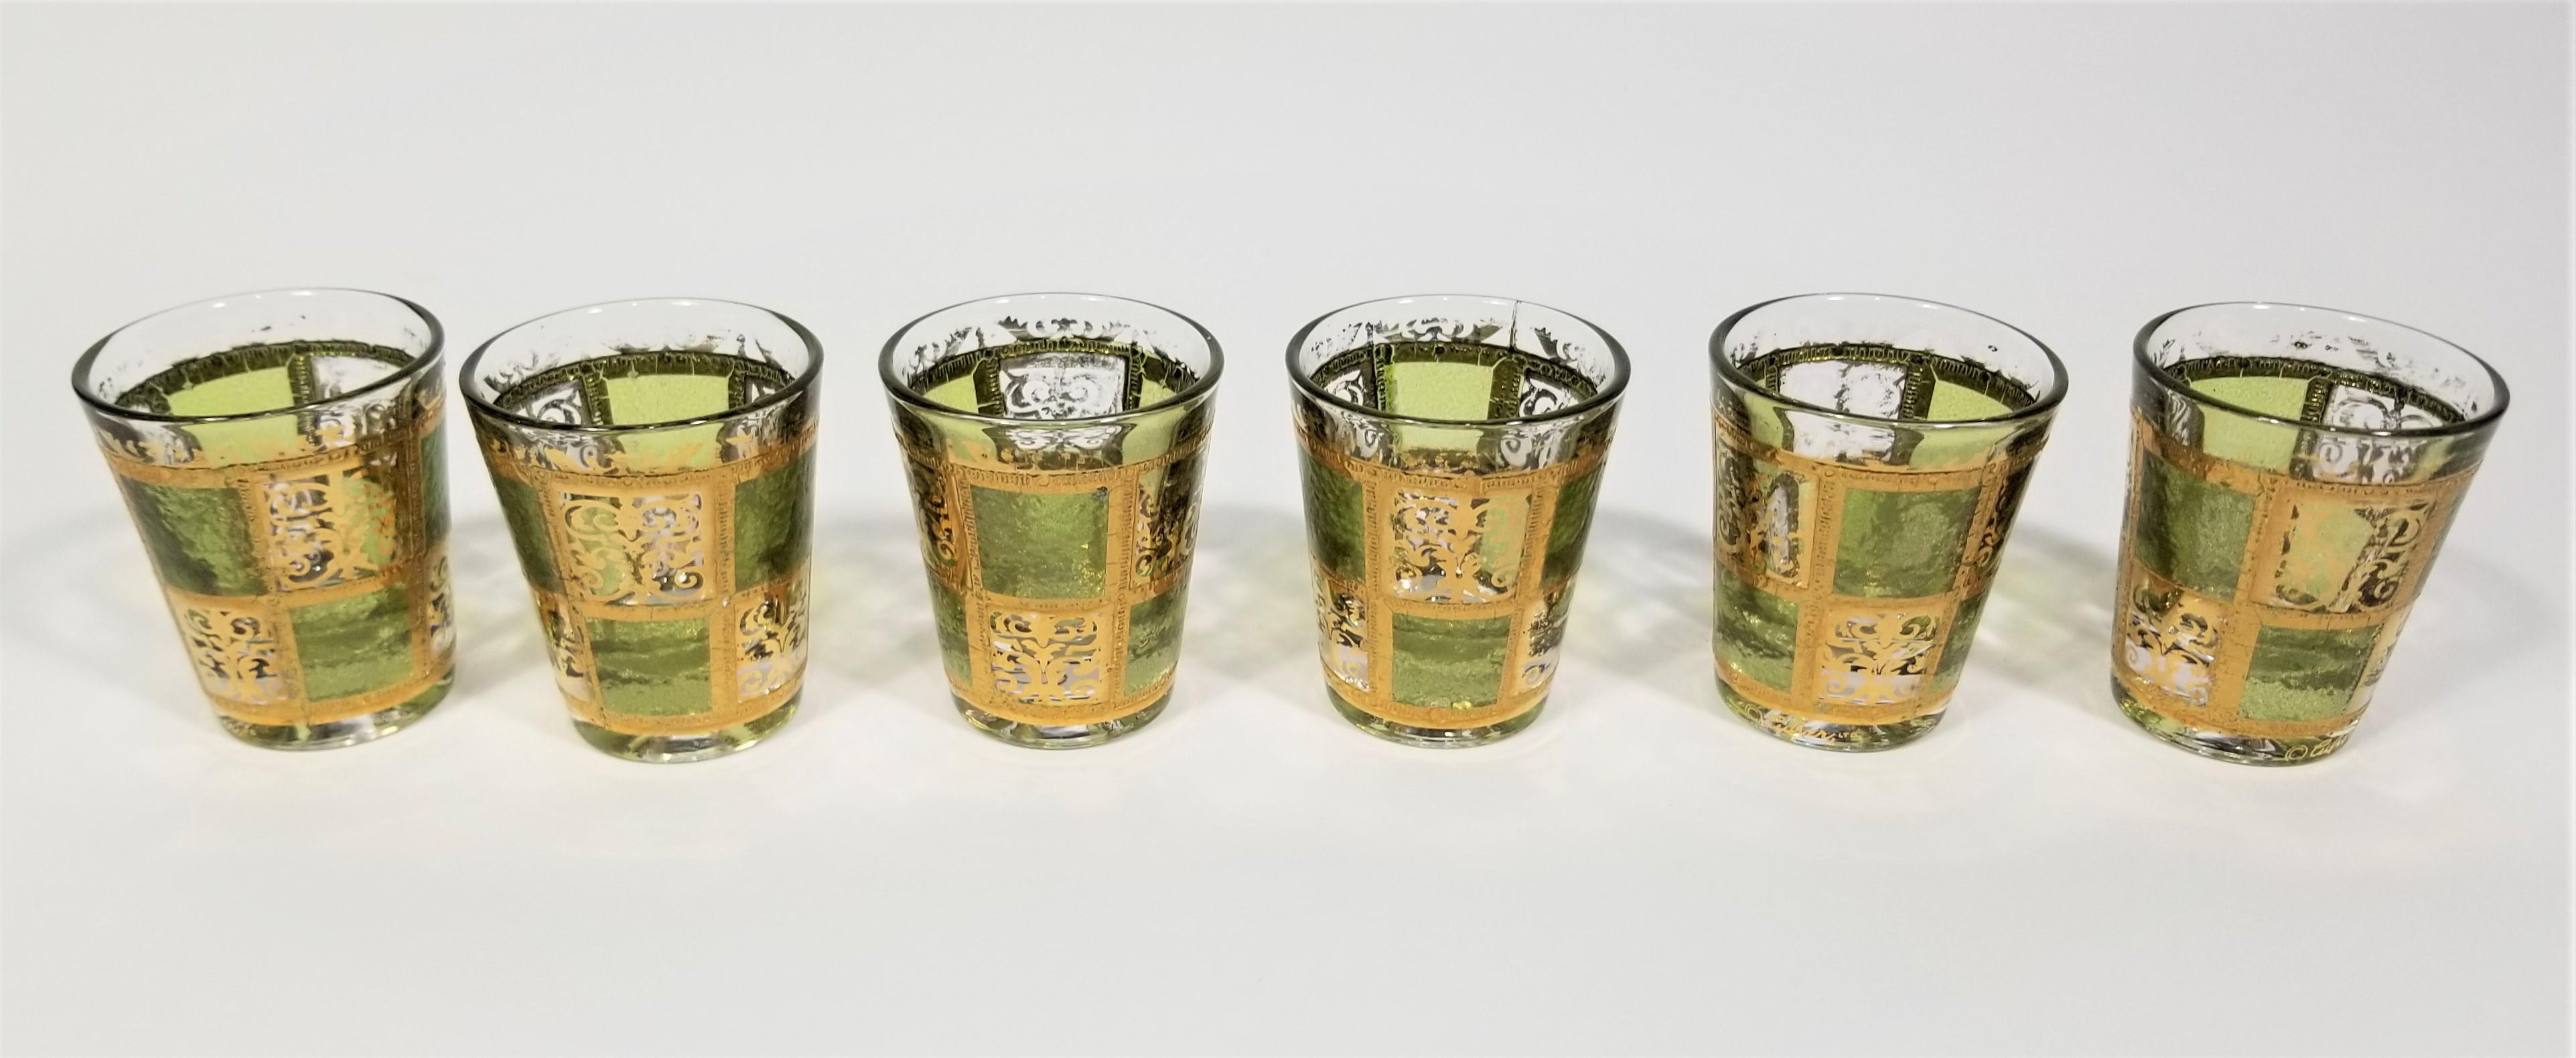 22k gold by culver shot glass